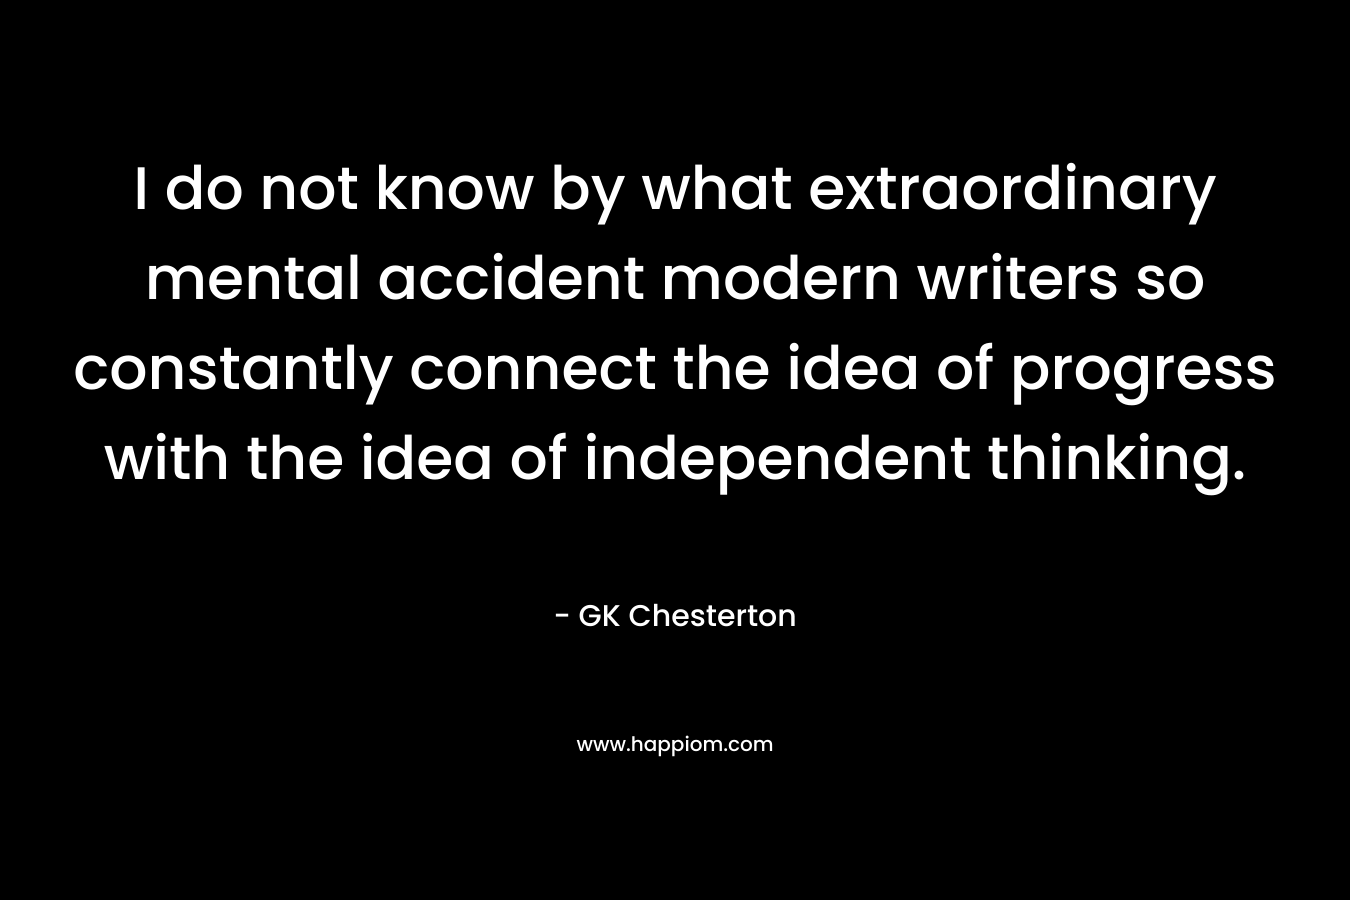 I do not know by what extraordinary mental accident modern writers so constantly connect the idea of progress with the idea of independent thinking. – GK Chesterton